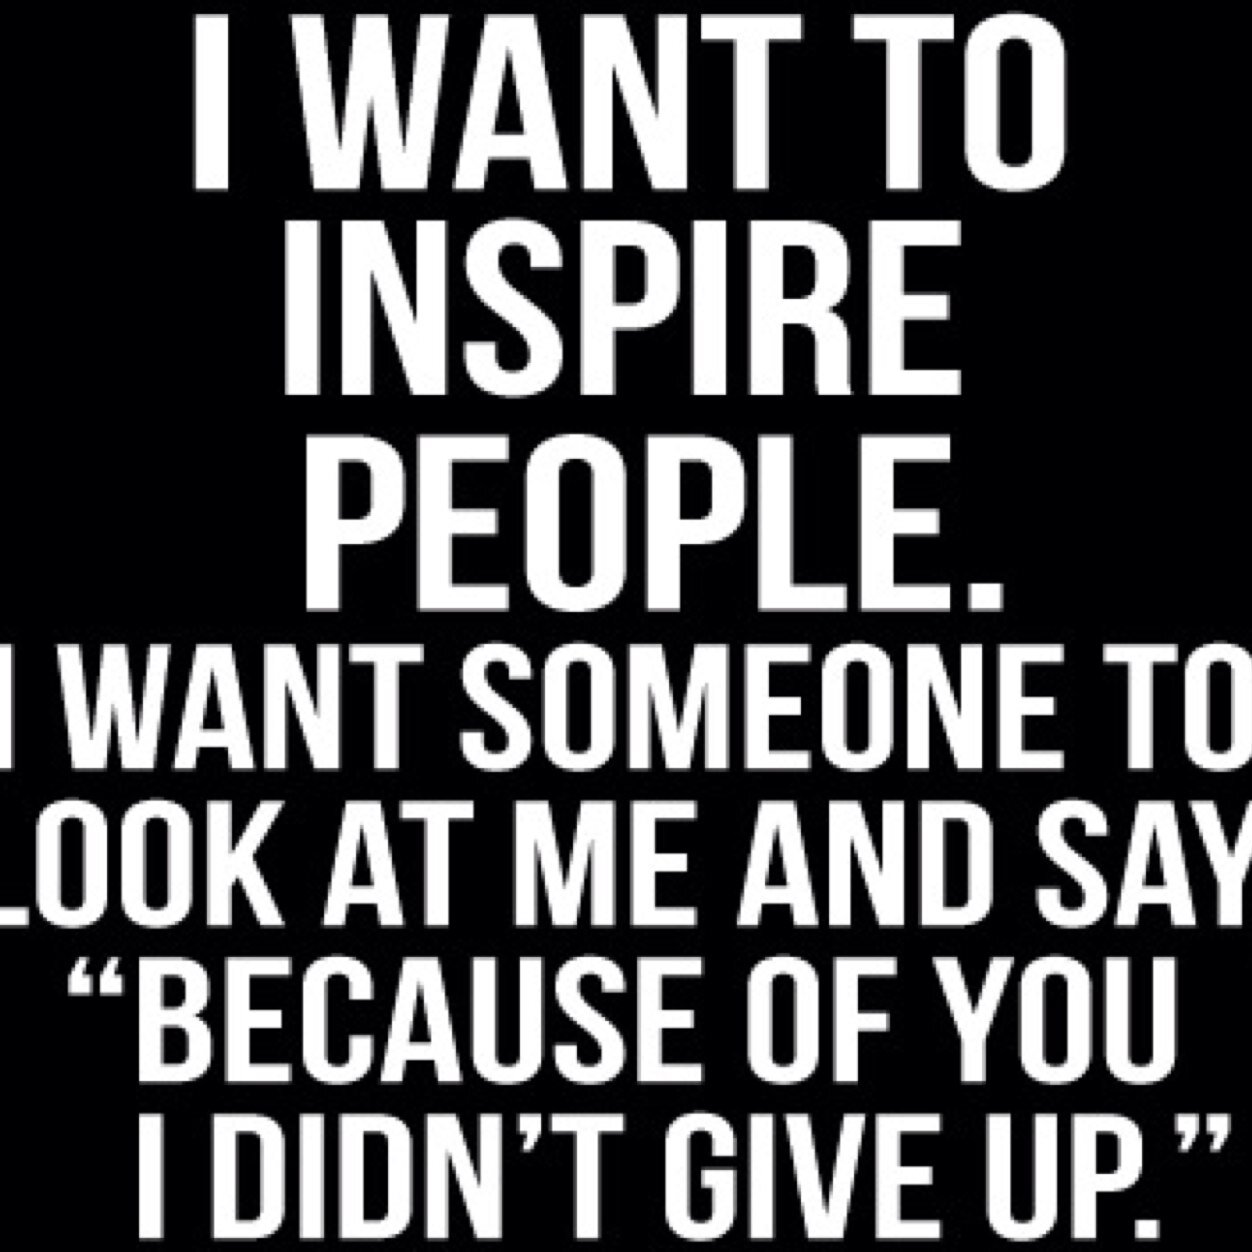 #inspire #fitness #fitfam #motivation #follow #quotes #workouts #nutrition #bodypump #shredded #gains #leangains